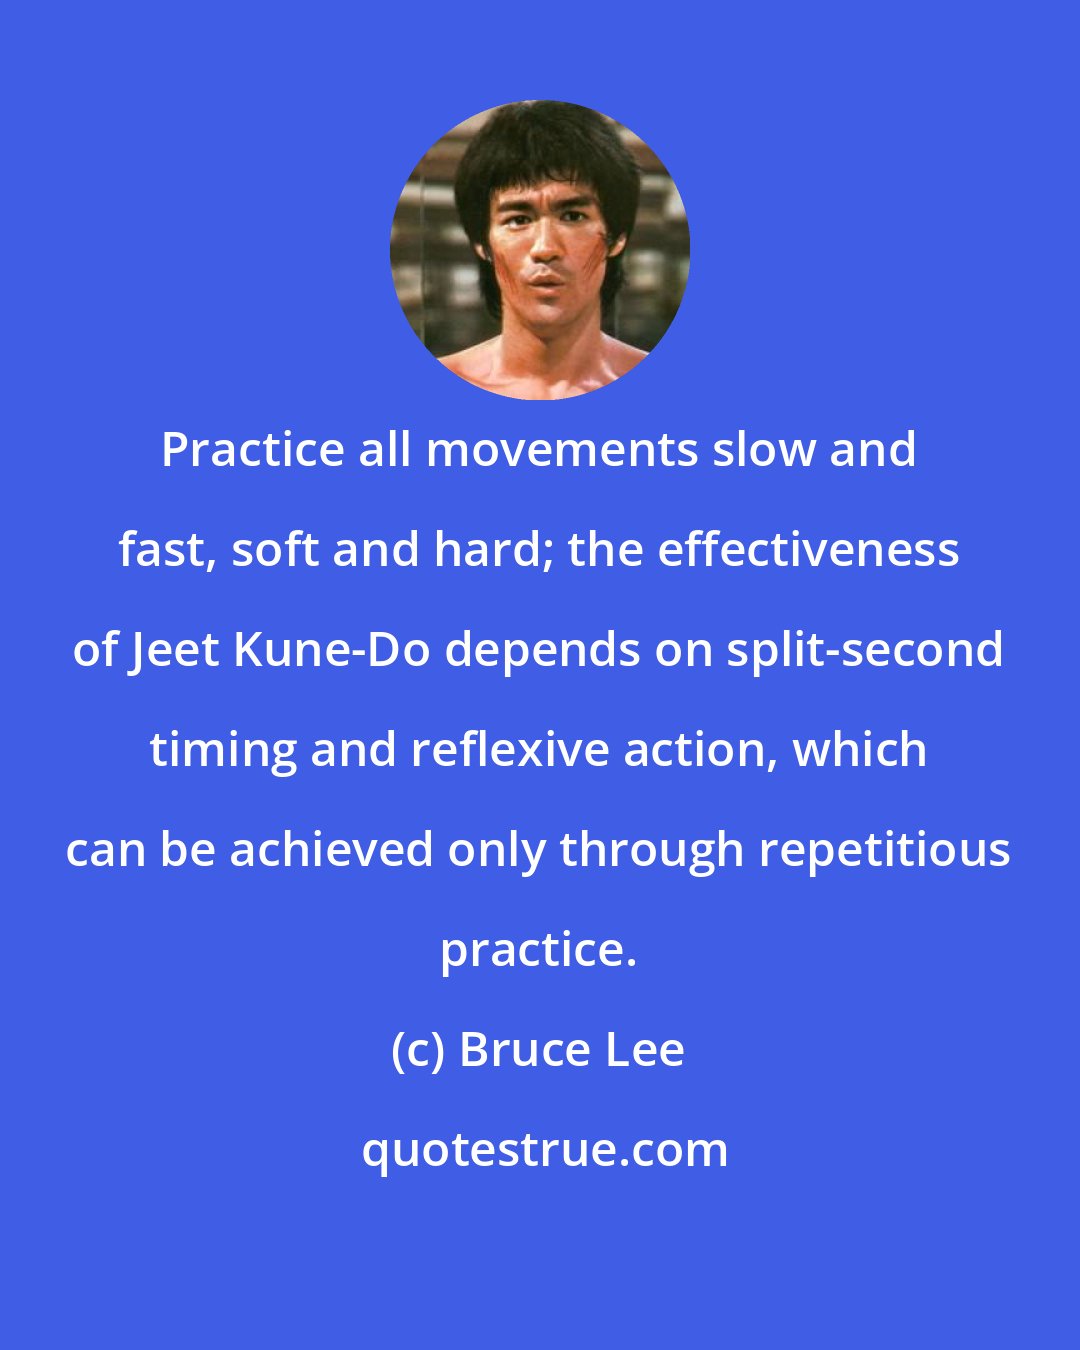 Bruce Lee: Practice all movements slow and fast, soft and hard; the effectiveness of Jeet Kune-Do depends on split-second timing and reflexive action, which can be achieved only through repetitious practice.